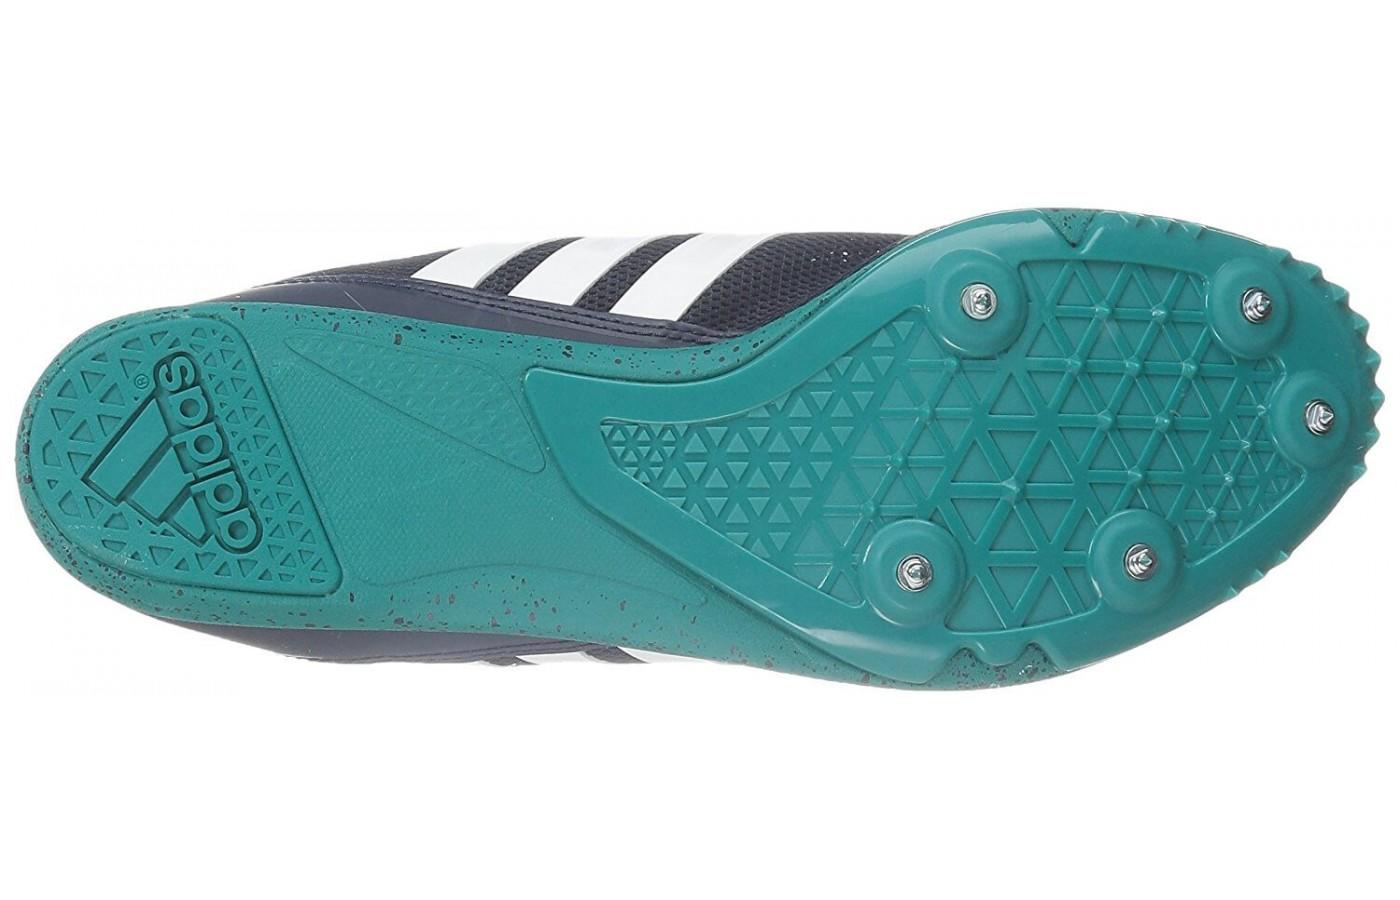 Strategically placed spikes encourage speed and traction